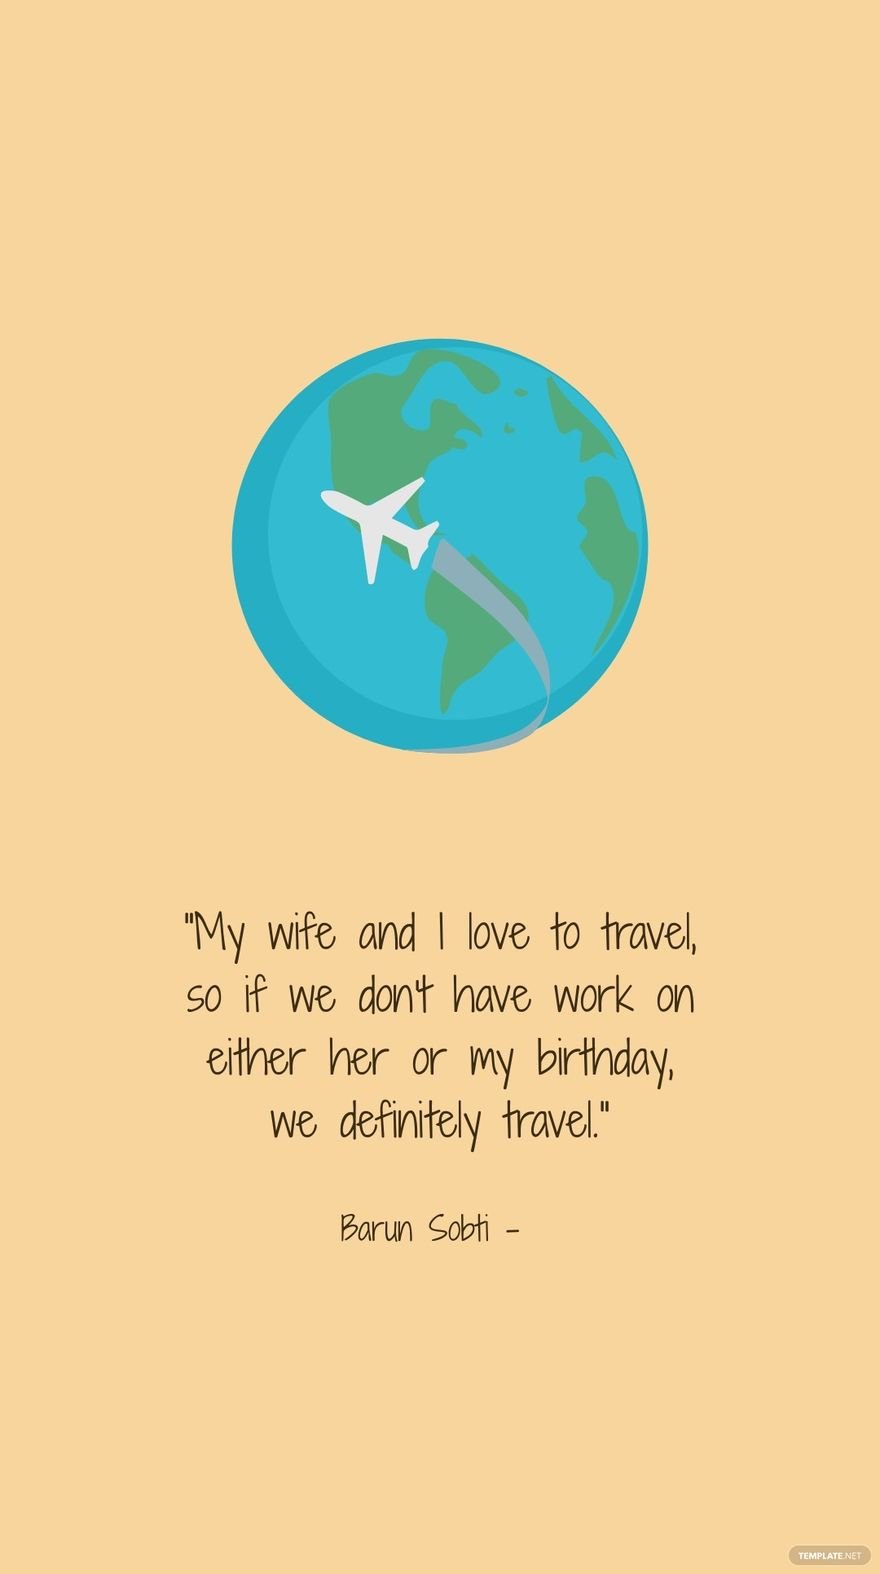 Free Barun Sobti - My wife and I love to travel, so if we don't have work on either her or my birthday, we definitely travel.